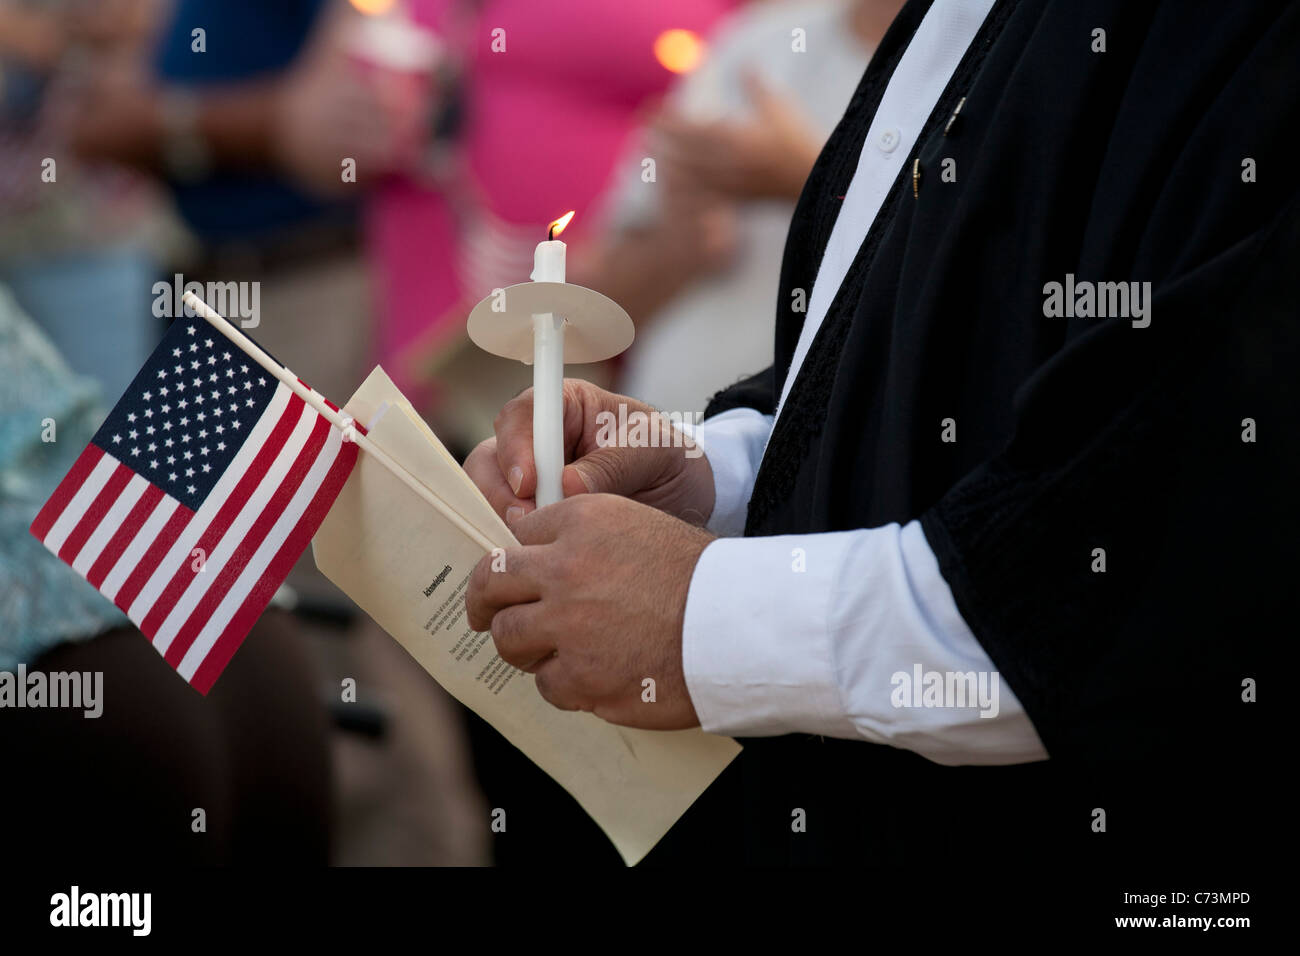 Tenth Anniversary Remembrance of September 11 Attacks Stock Photo